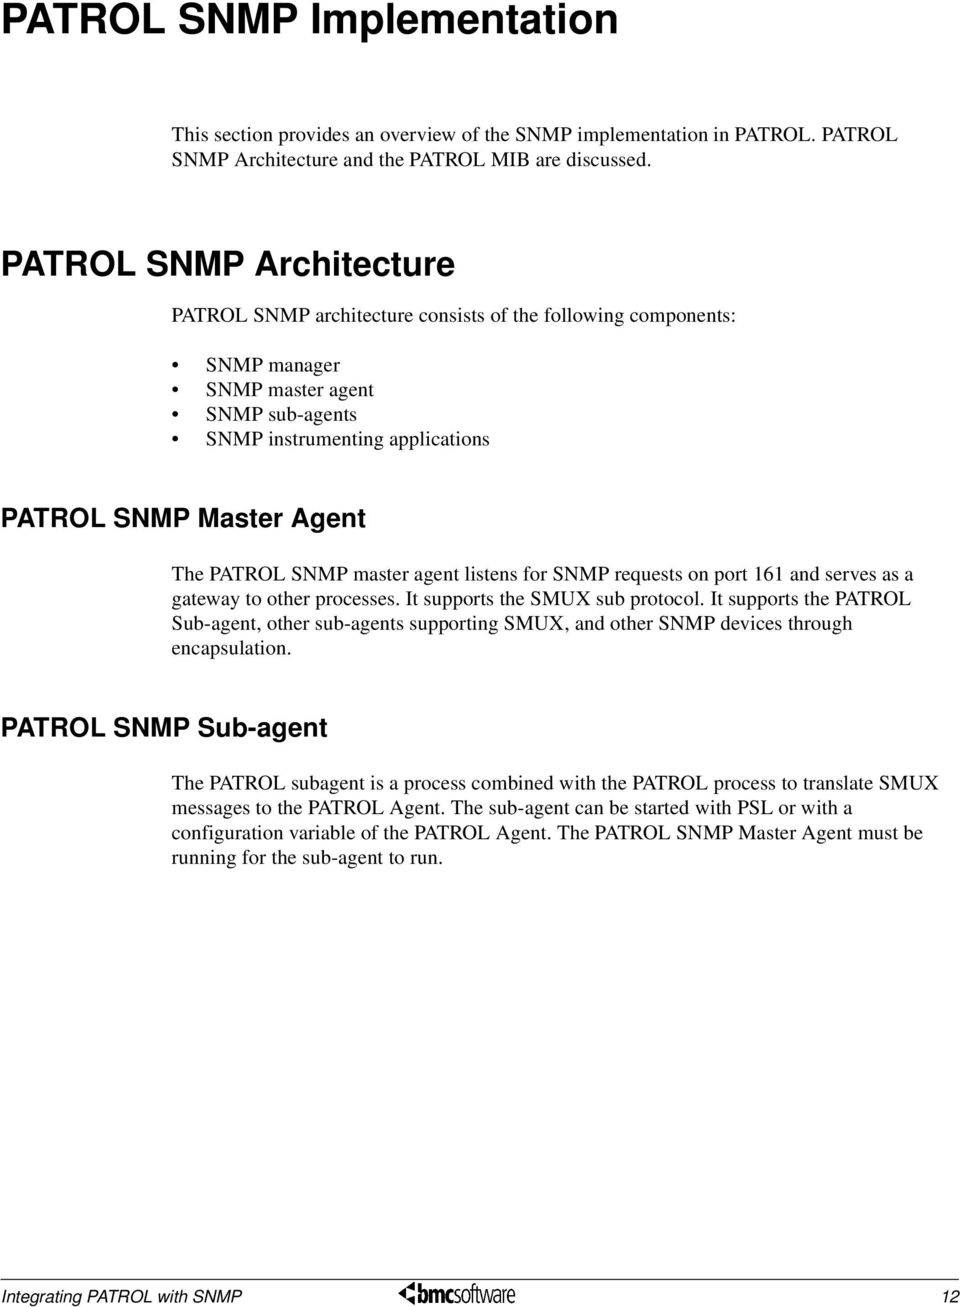 PATROL SNMP master agent listens for SNMP requests on port 161 and serves as a gateway to other processes. It supports the SMUX sub protocol.